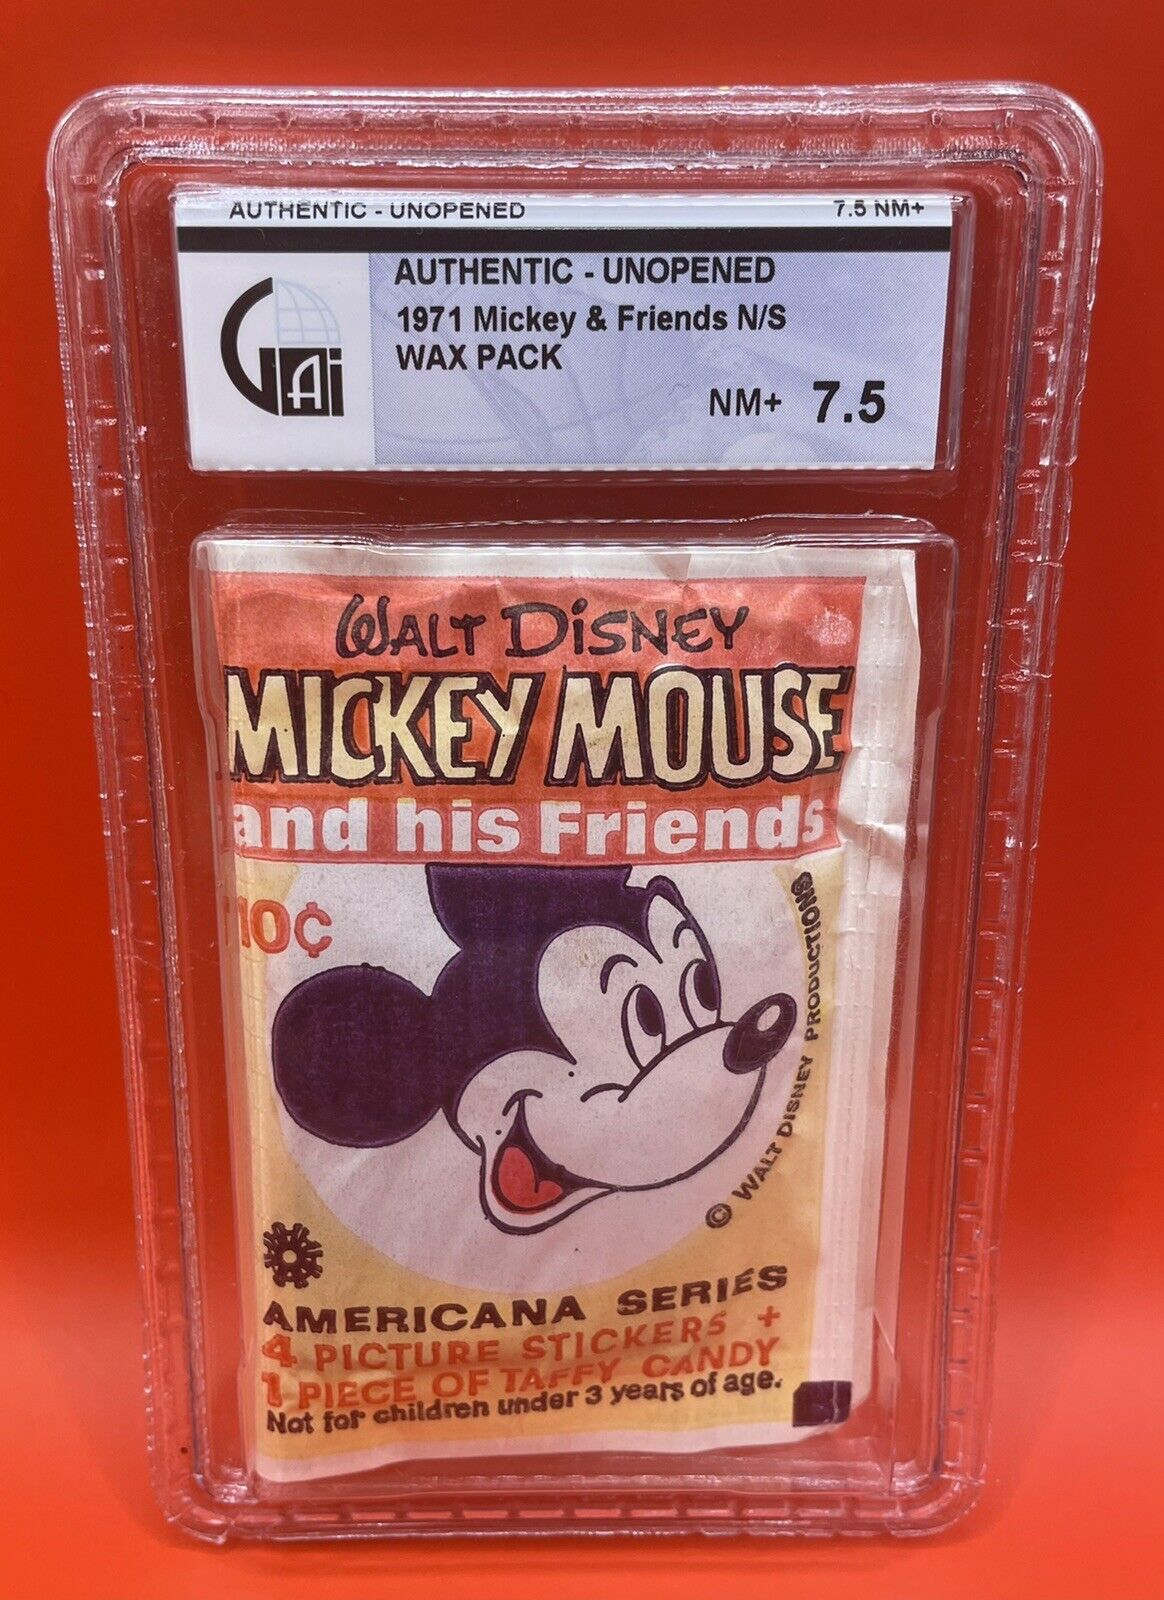 Walt Disney 1971 Mickey Mouse & Friends WAX PACK NM 7.5 Global Authentication 